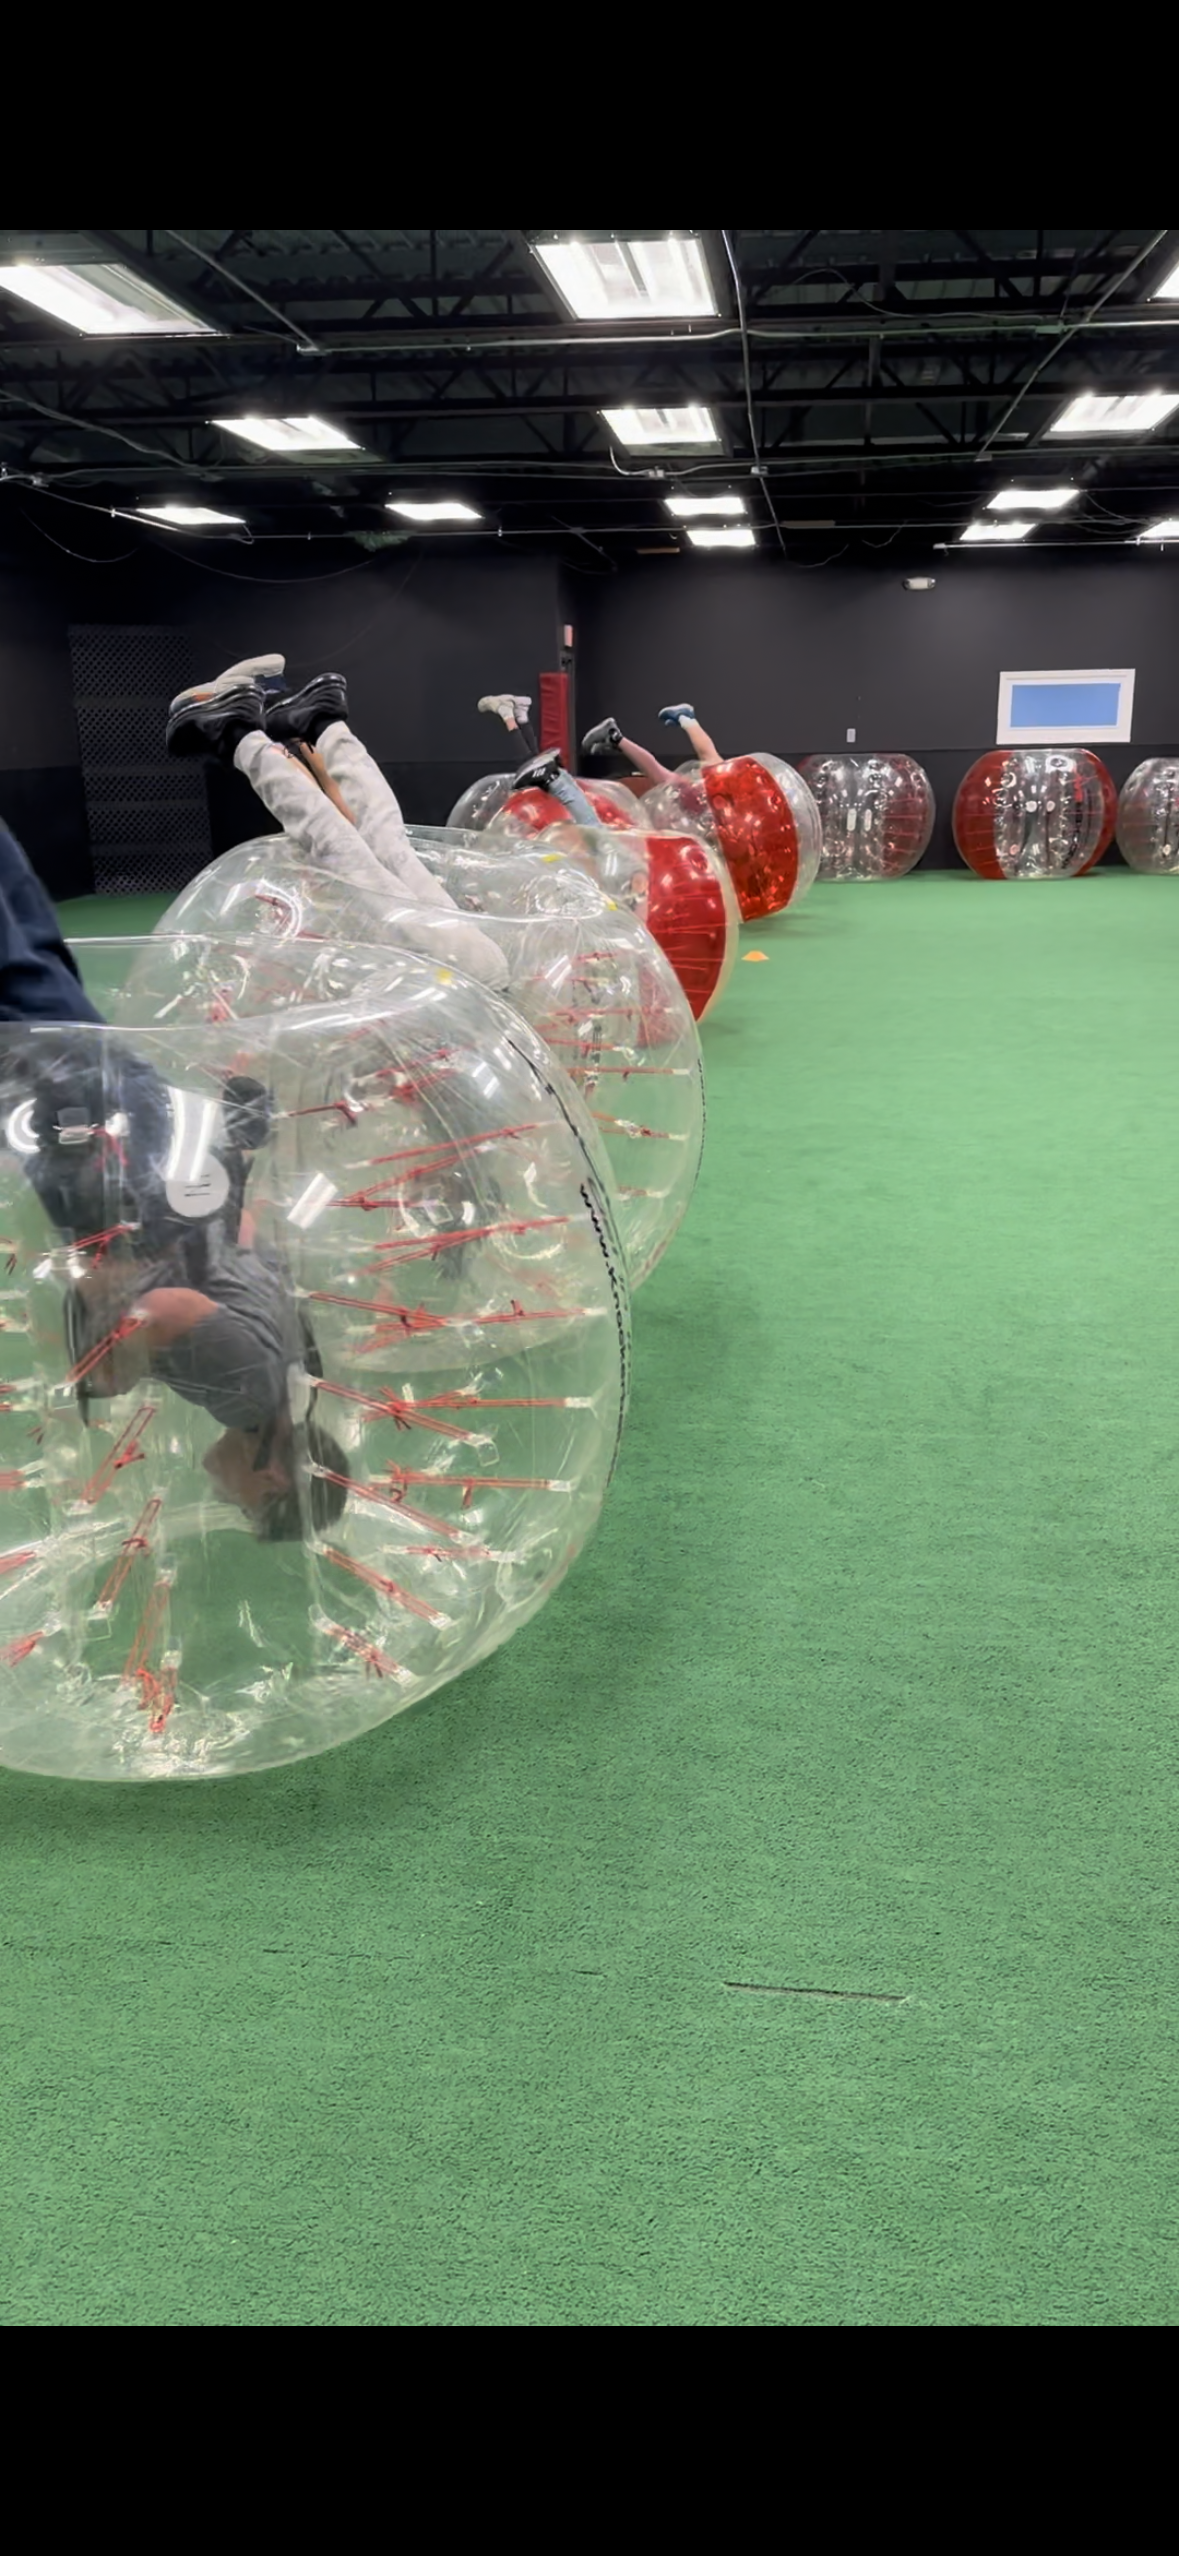 Up To 15 Knockerball Players 1 Hour Play Promo